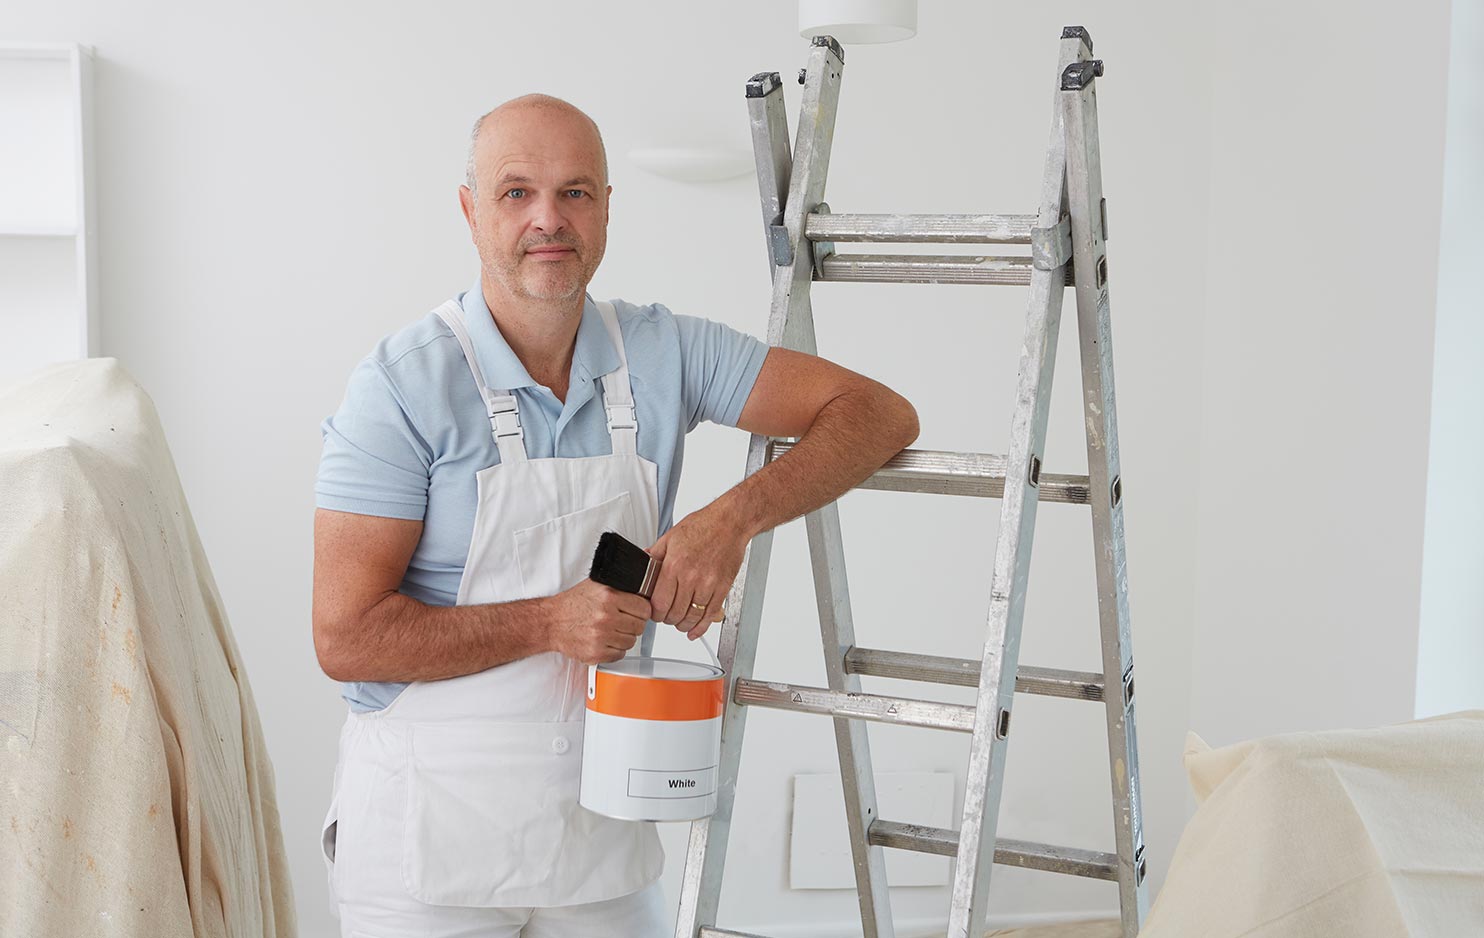 A tradesman is holding a pot of paint and paintbrush whilst leaning against a step ladder.